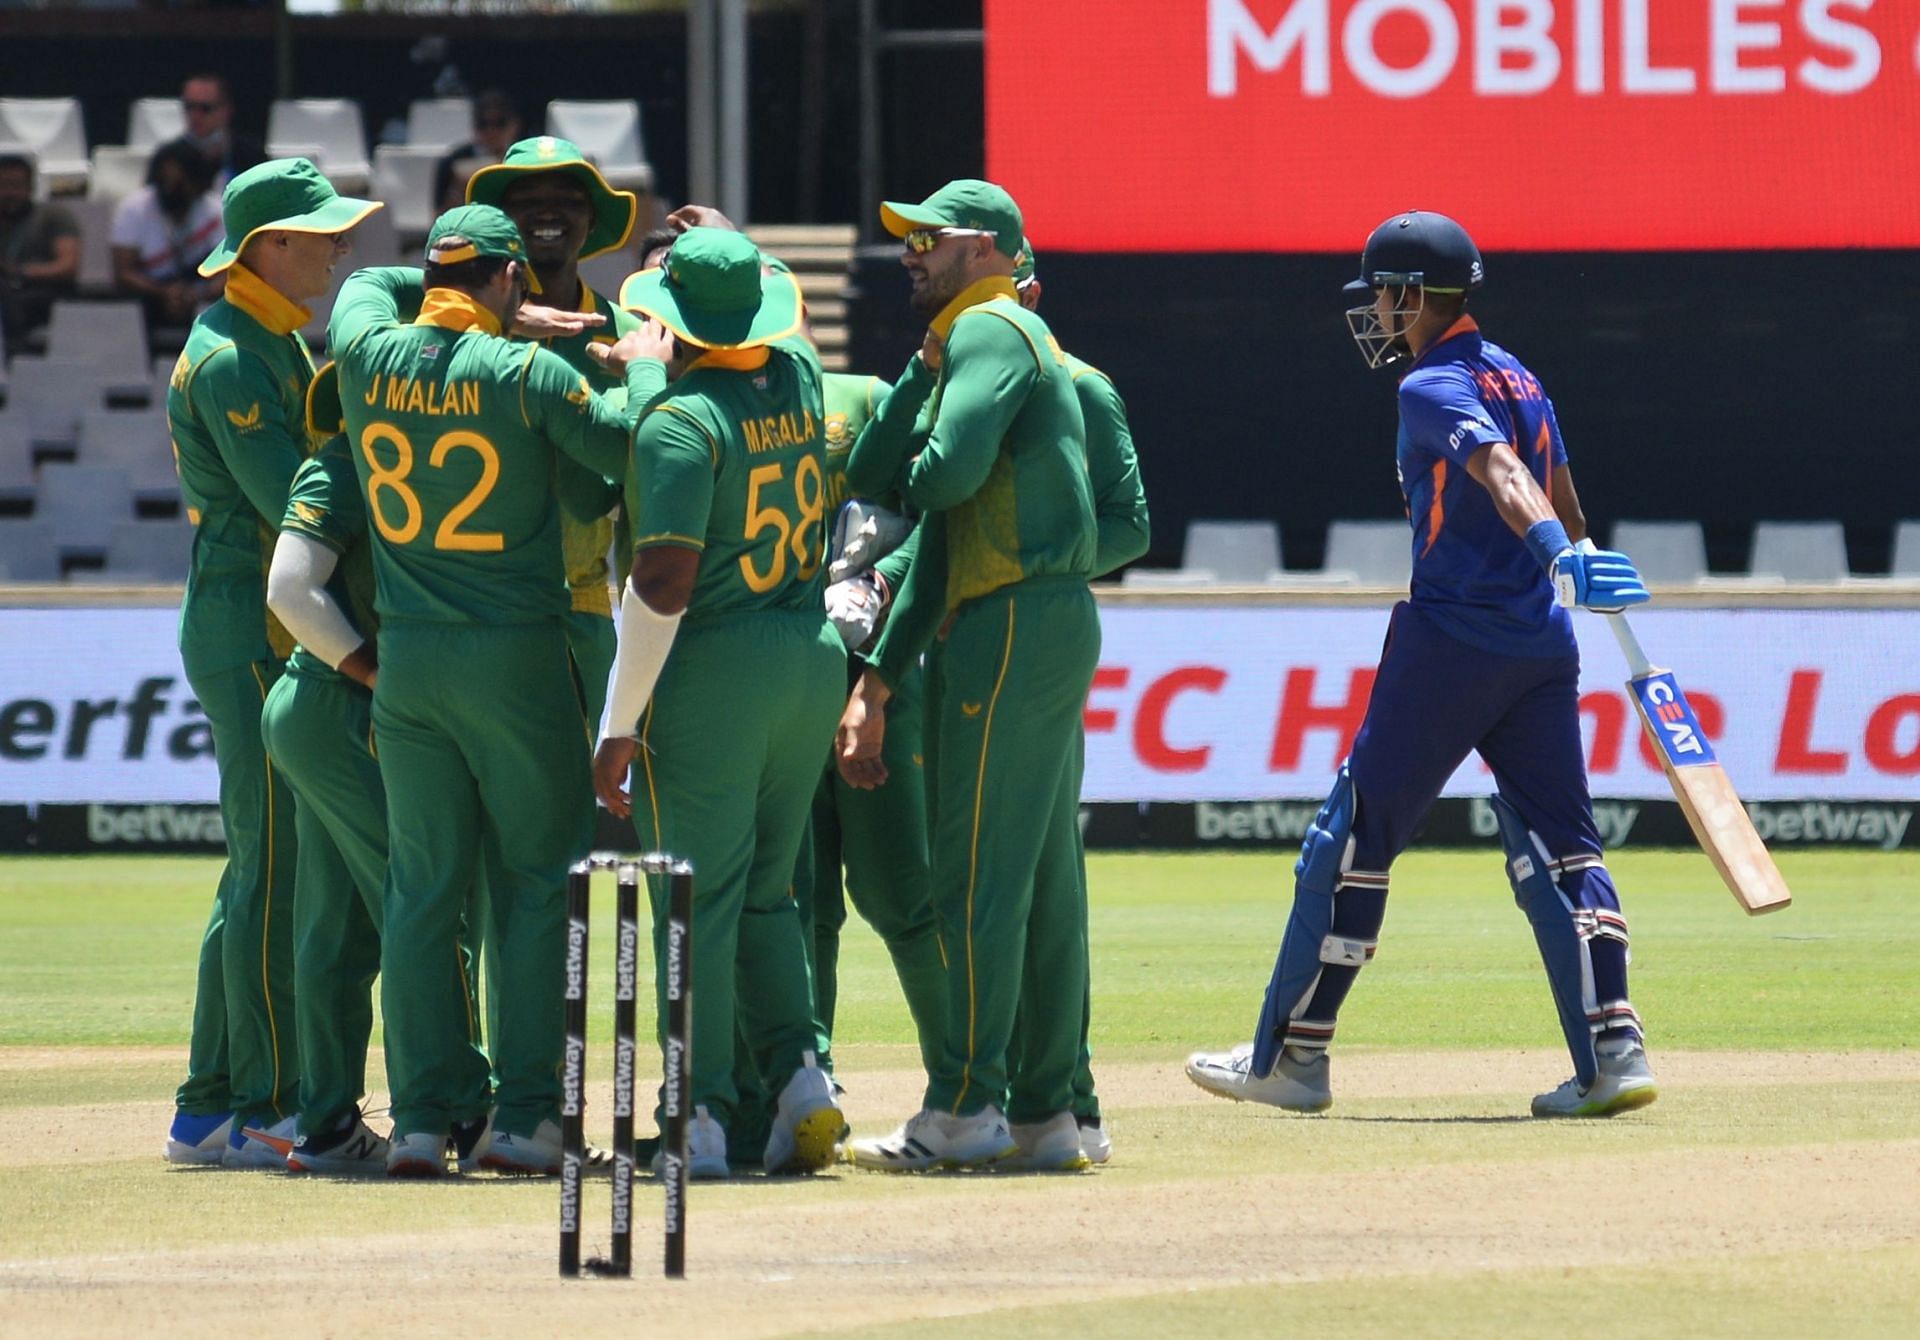 South Africa took an unassailable 2-0 lead to seal the ODI series against India